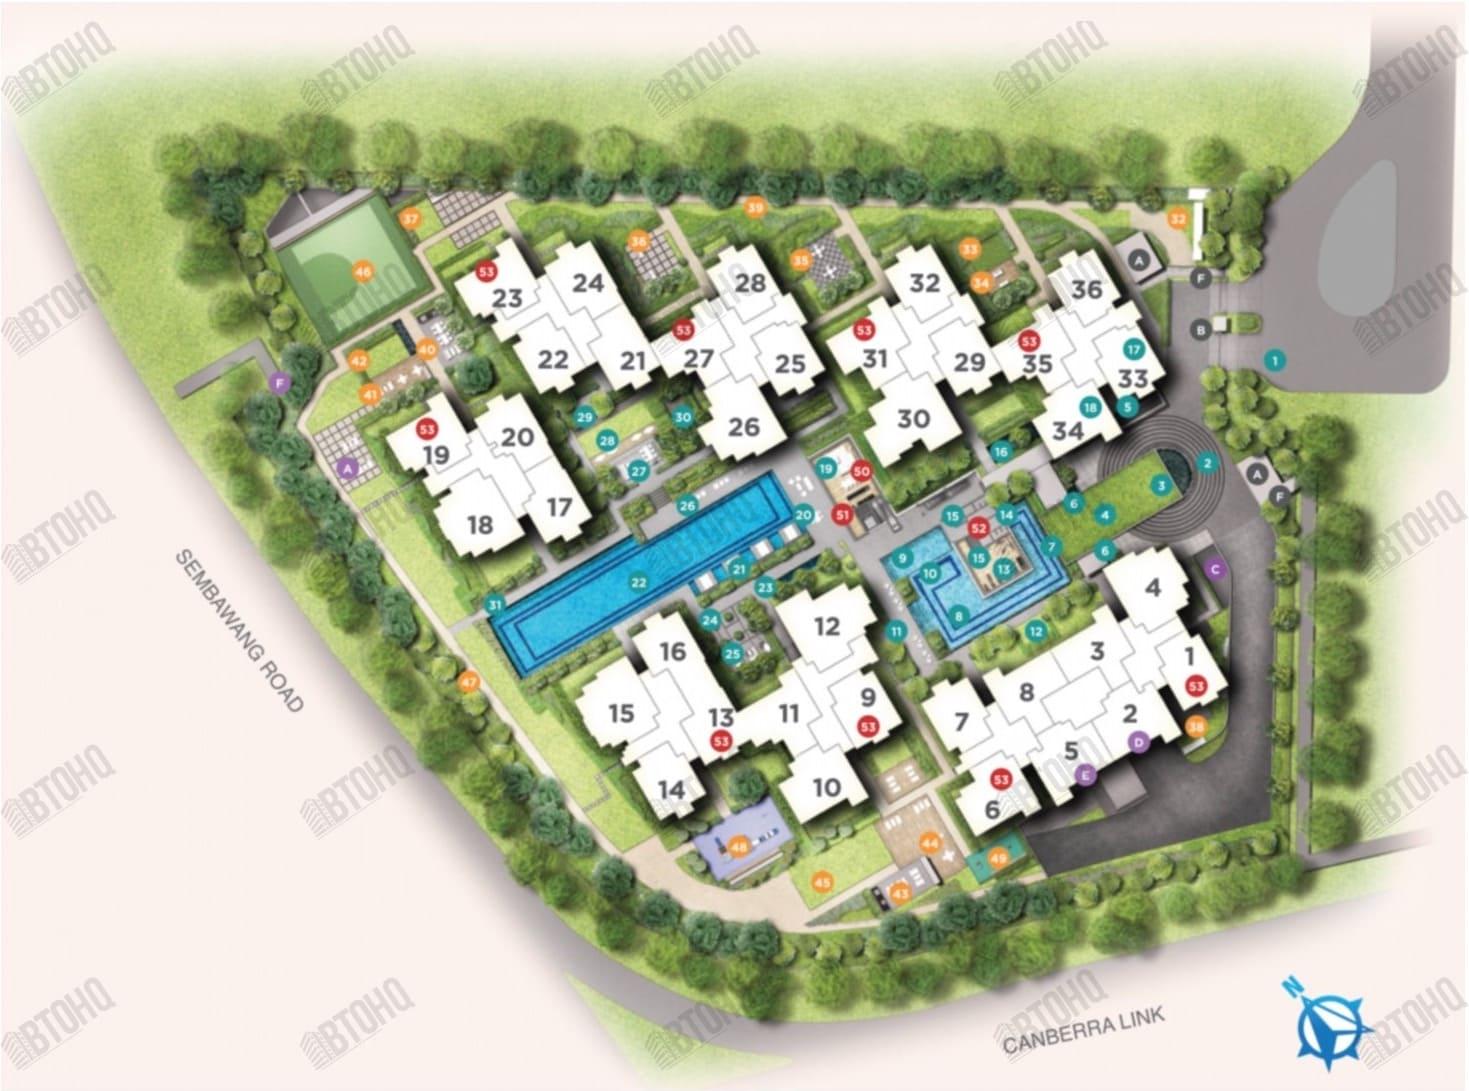 Provence Residence Site Plan